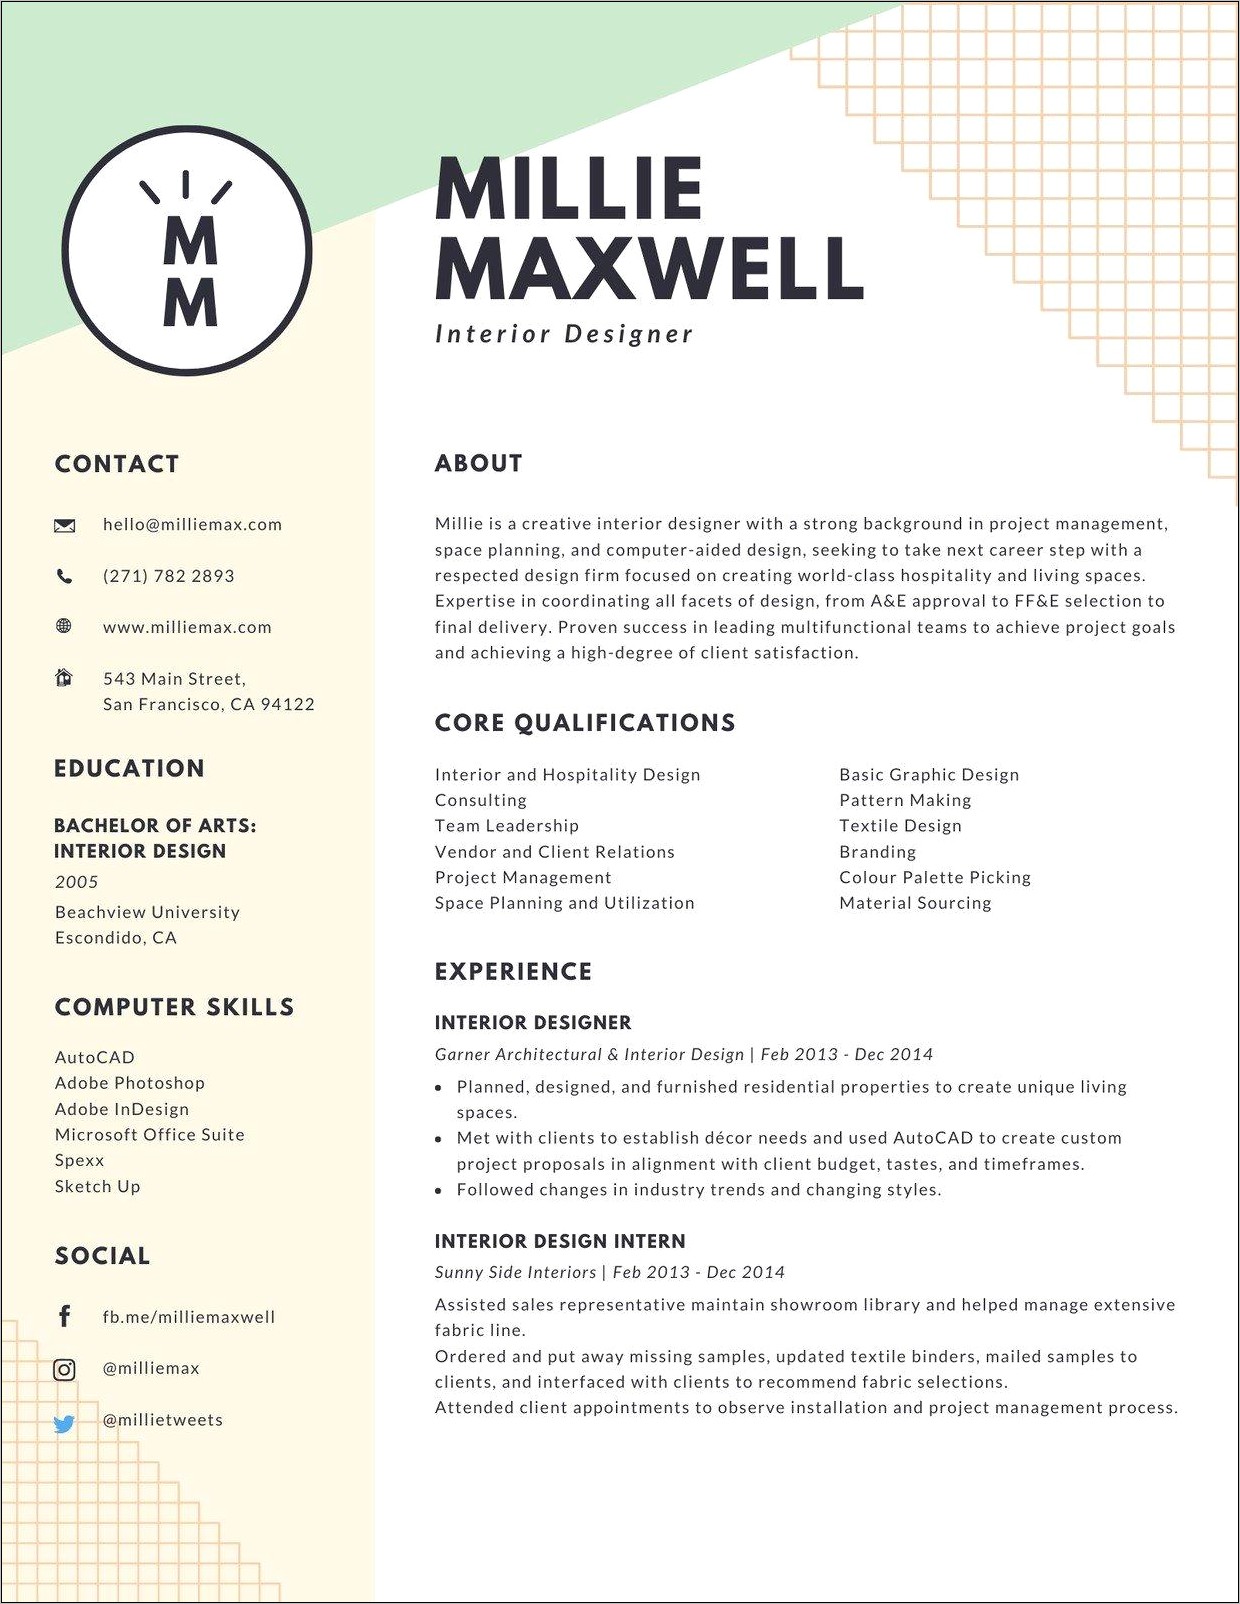 About Me Profile Resume Examples